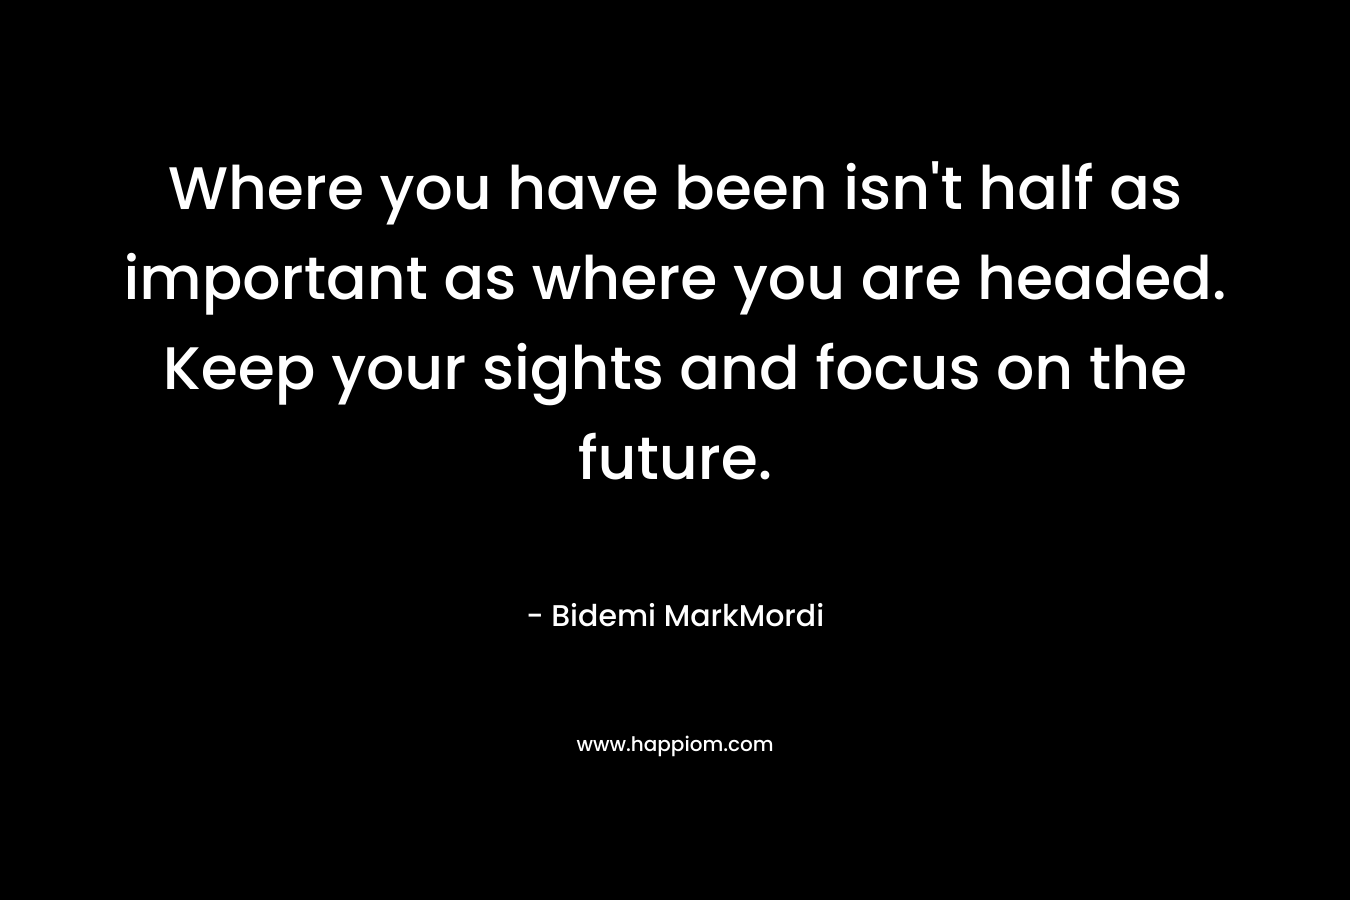 Where you have been isn't half as important as where you are headed. Keep your sights and focus on the future.